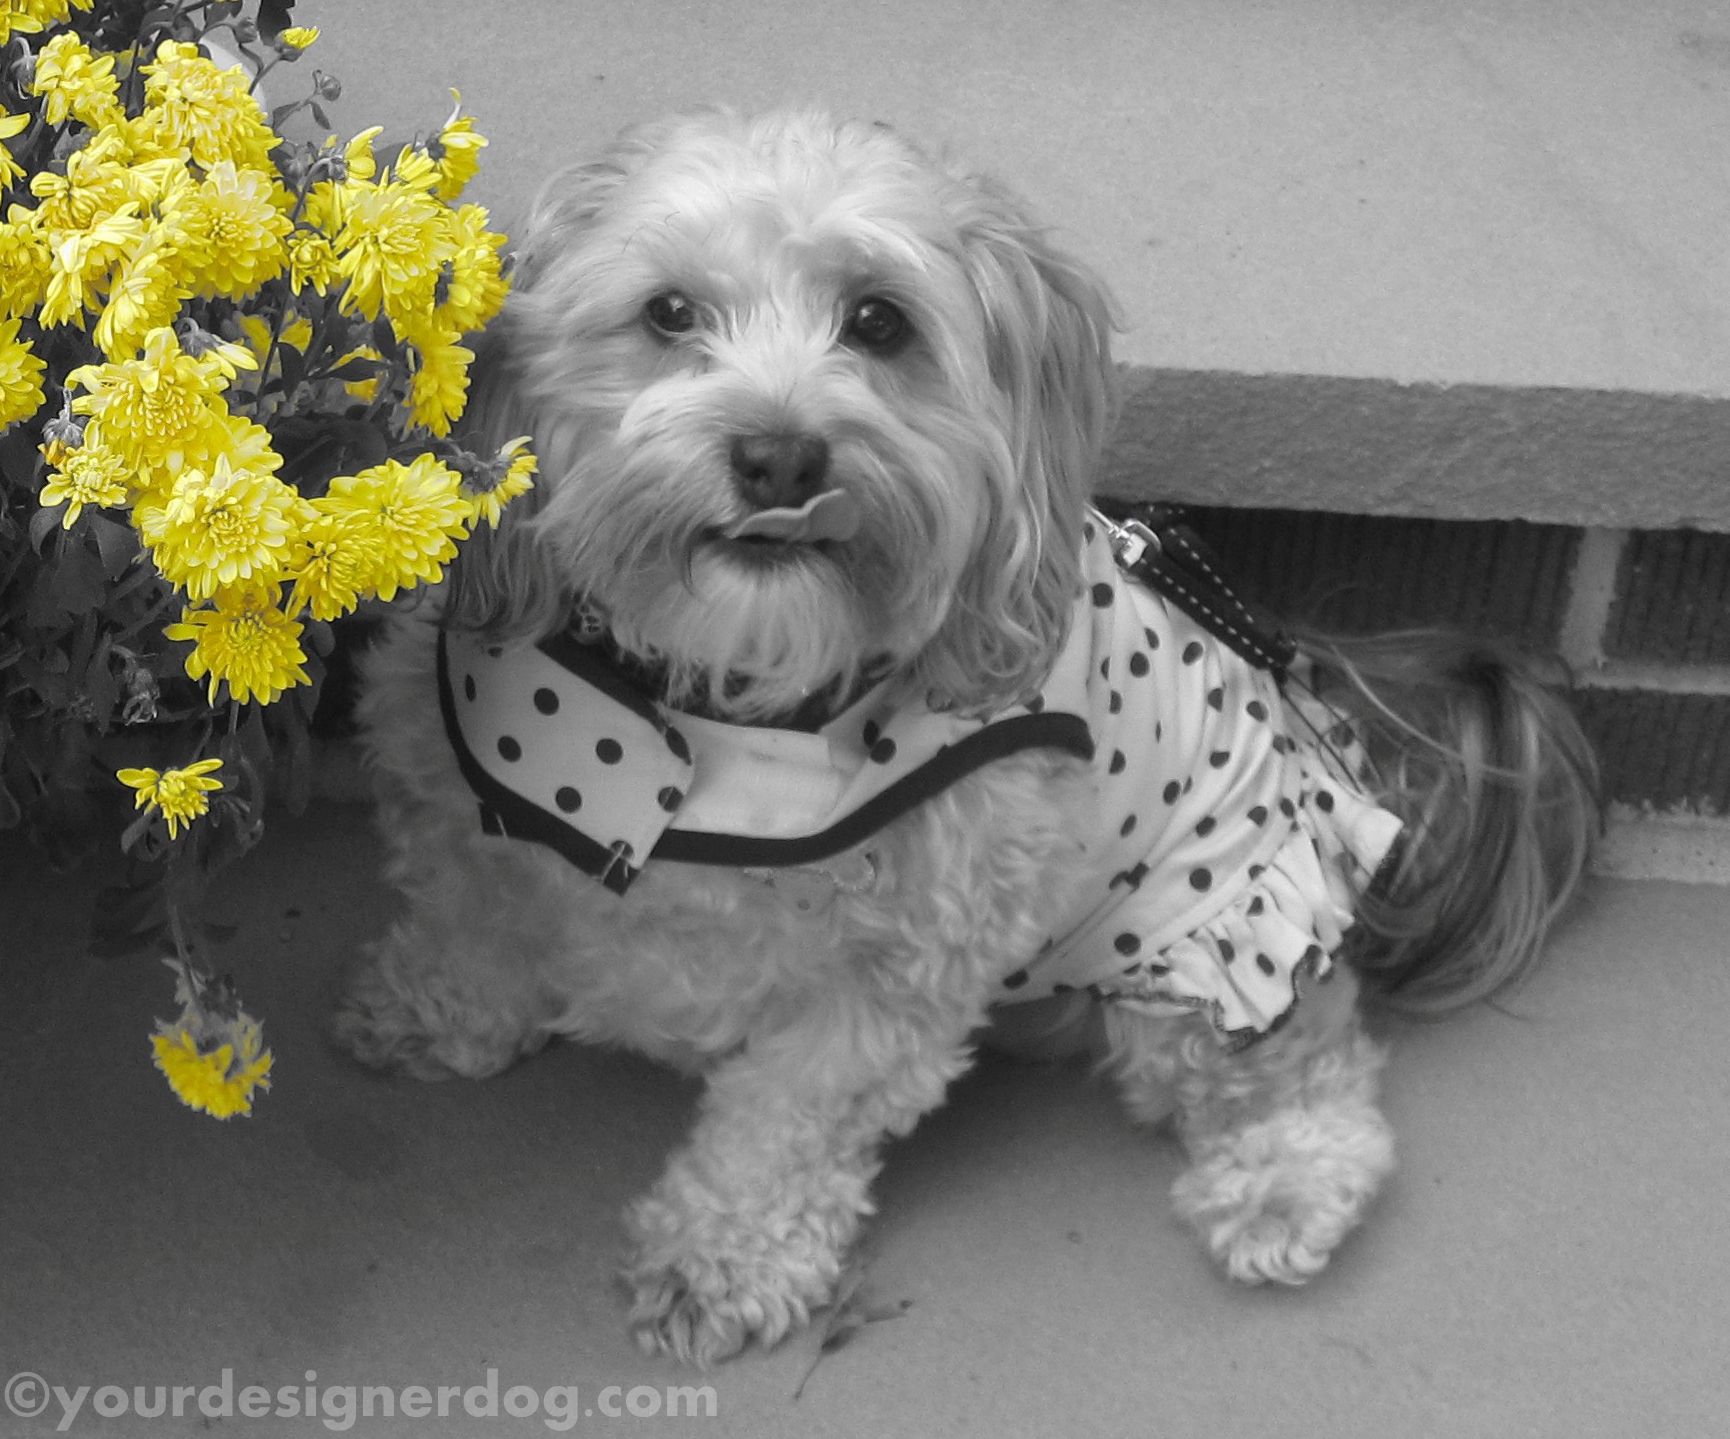 dogs, designer dogs, yorkipoo, yorkie poo, black and white photography, mums, dogs with flowers, tongue out